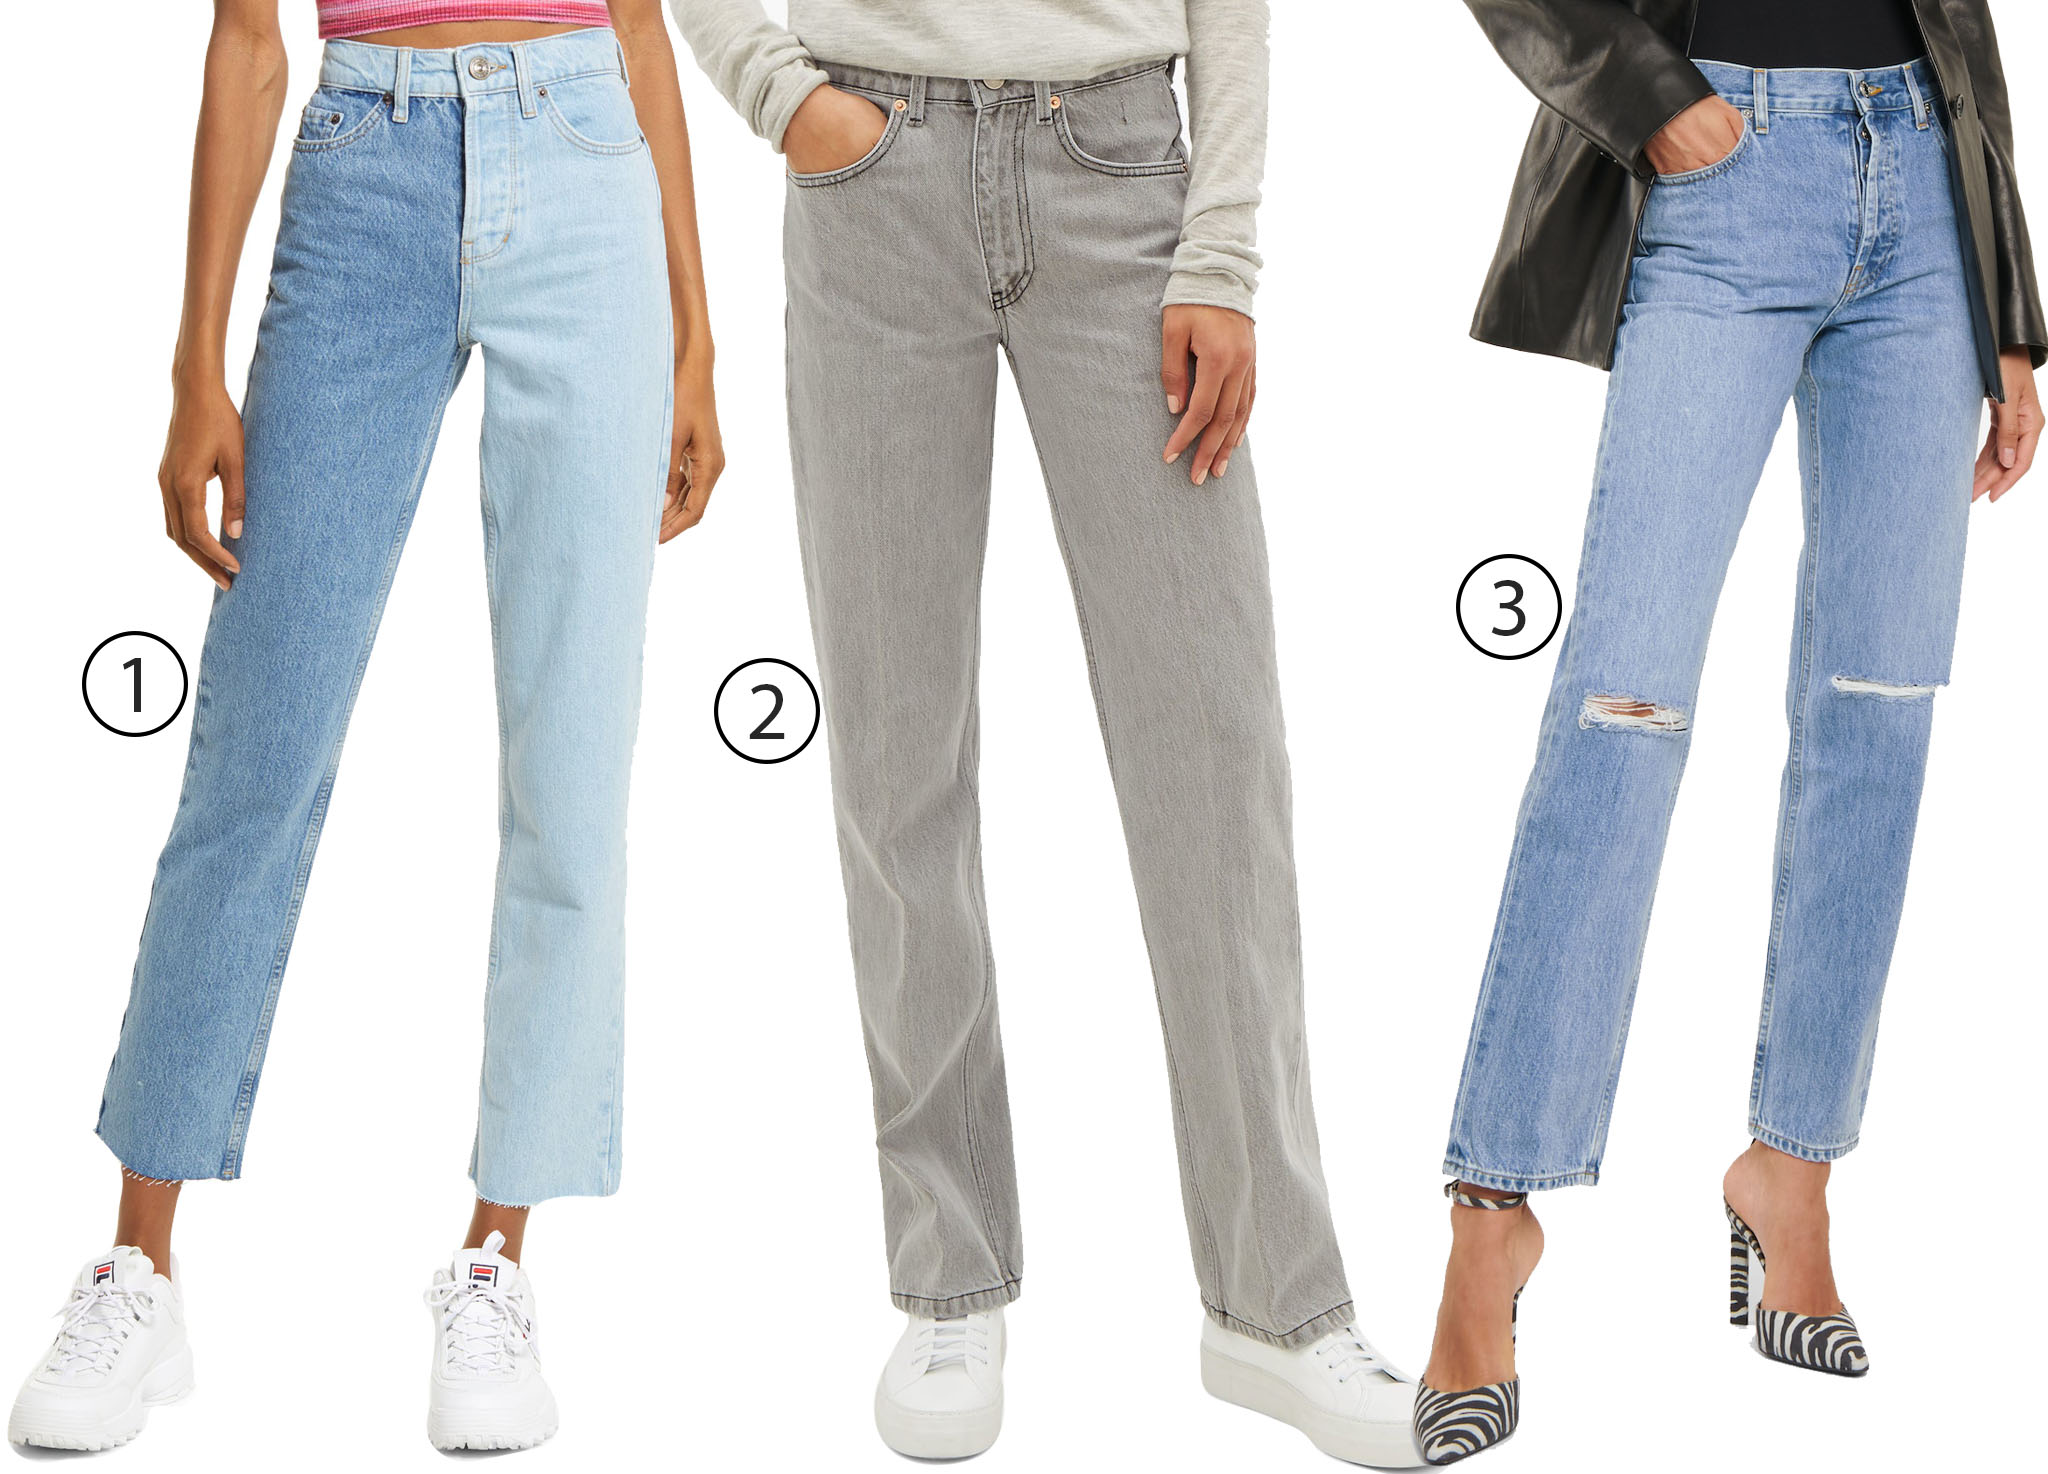 Update your closet with BDG Urban Outfitters two-tone Pax straight-leg jeans, Raey Push straight-leg jeans, and Helmut Lang distressed high-rise straight jeans for a versatile, chic look